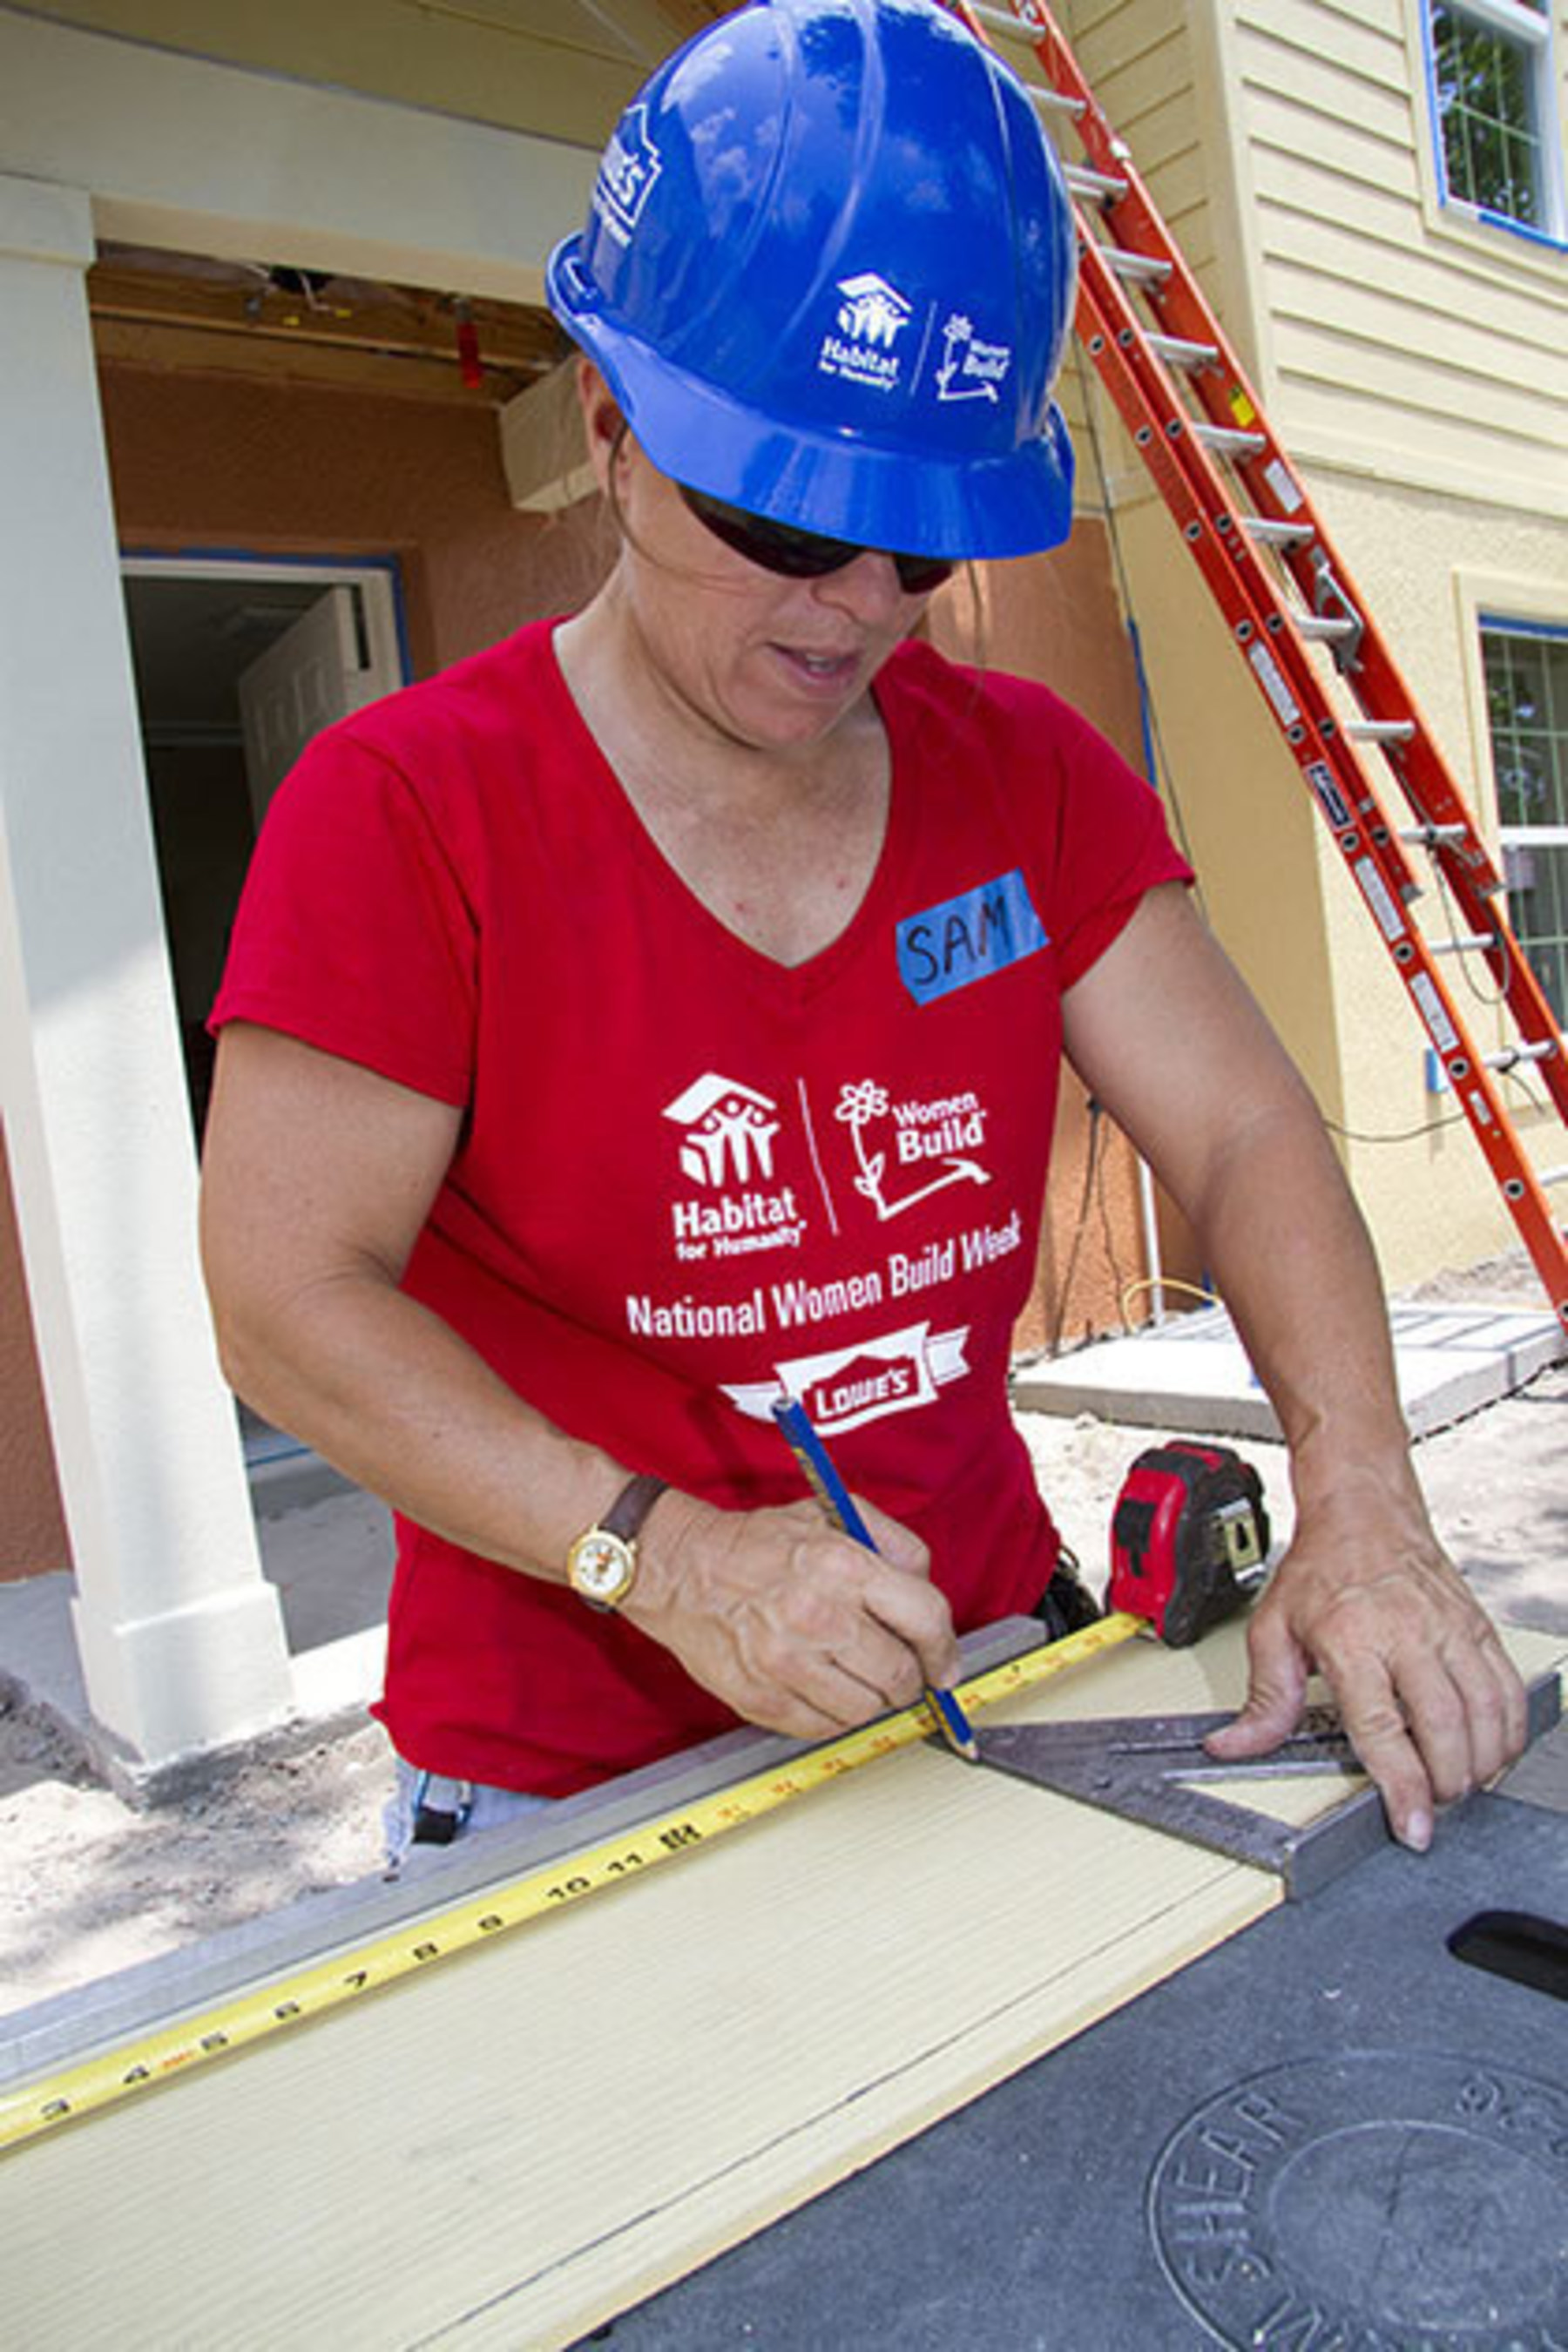 More than 15,000 women across the country, including Lowe's Heroes employee volunteers, are expected to build or repair homes at Habitat for Humanity construction sites in recognition of National Women Build Week, May 2-10.